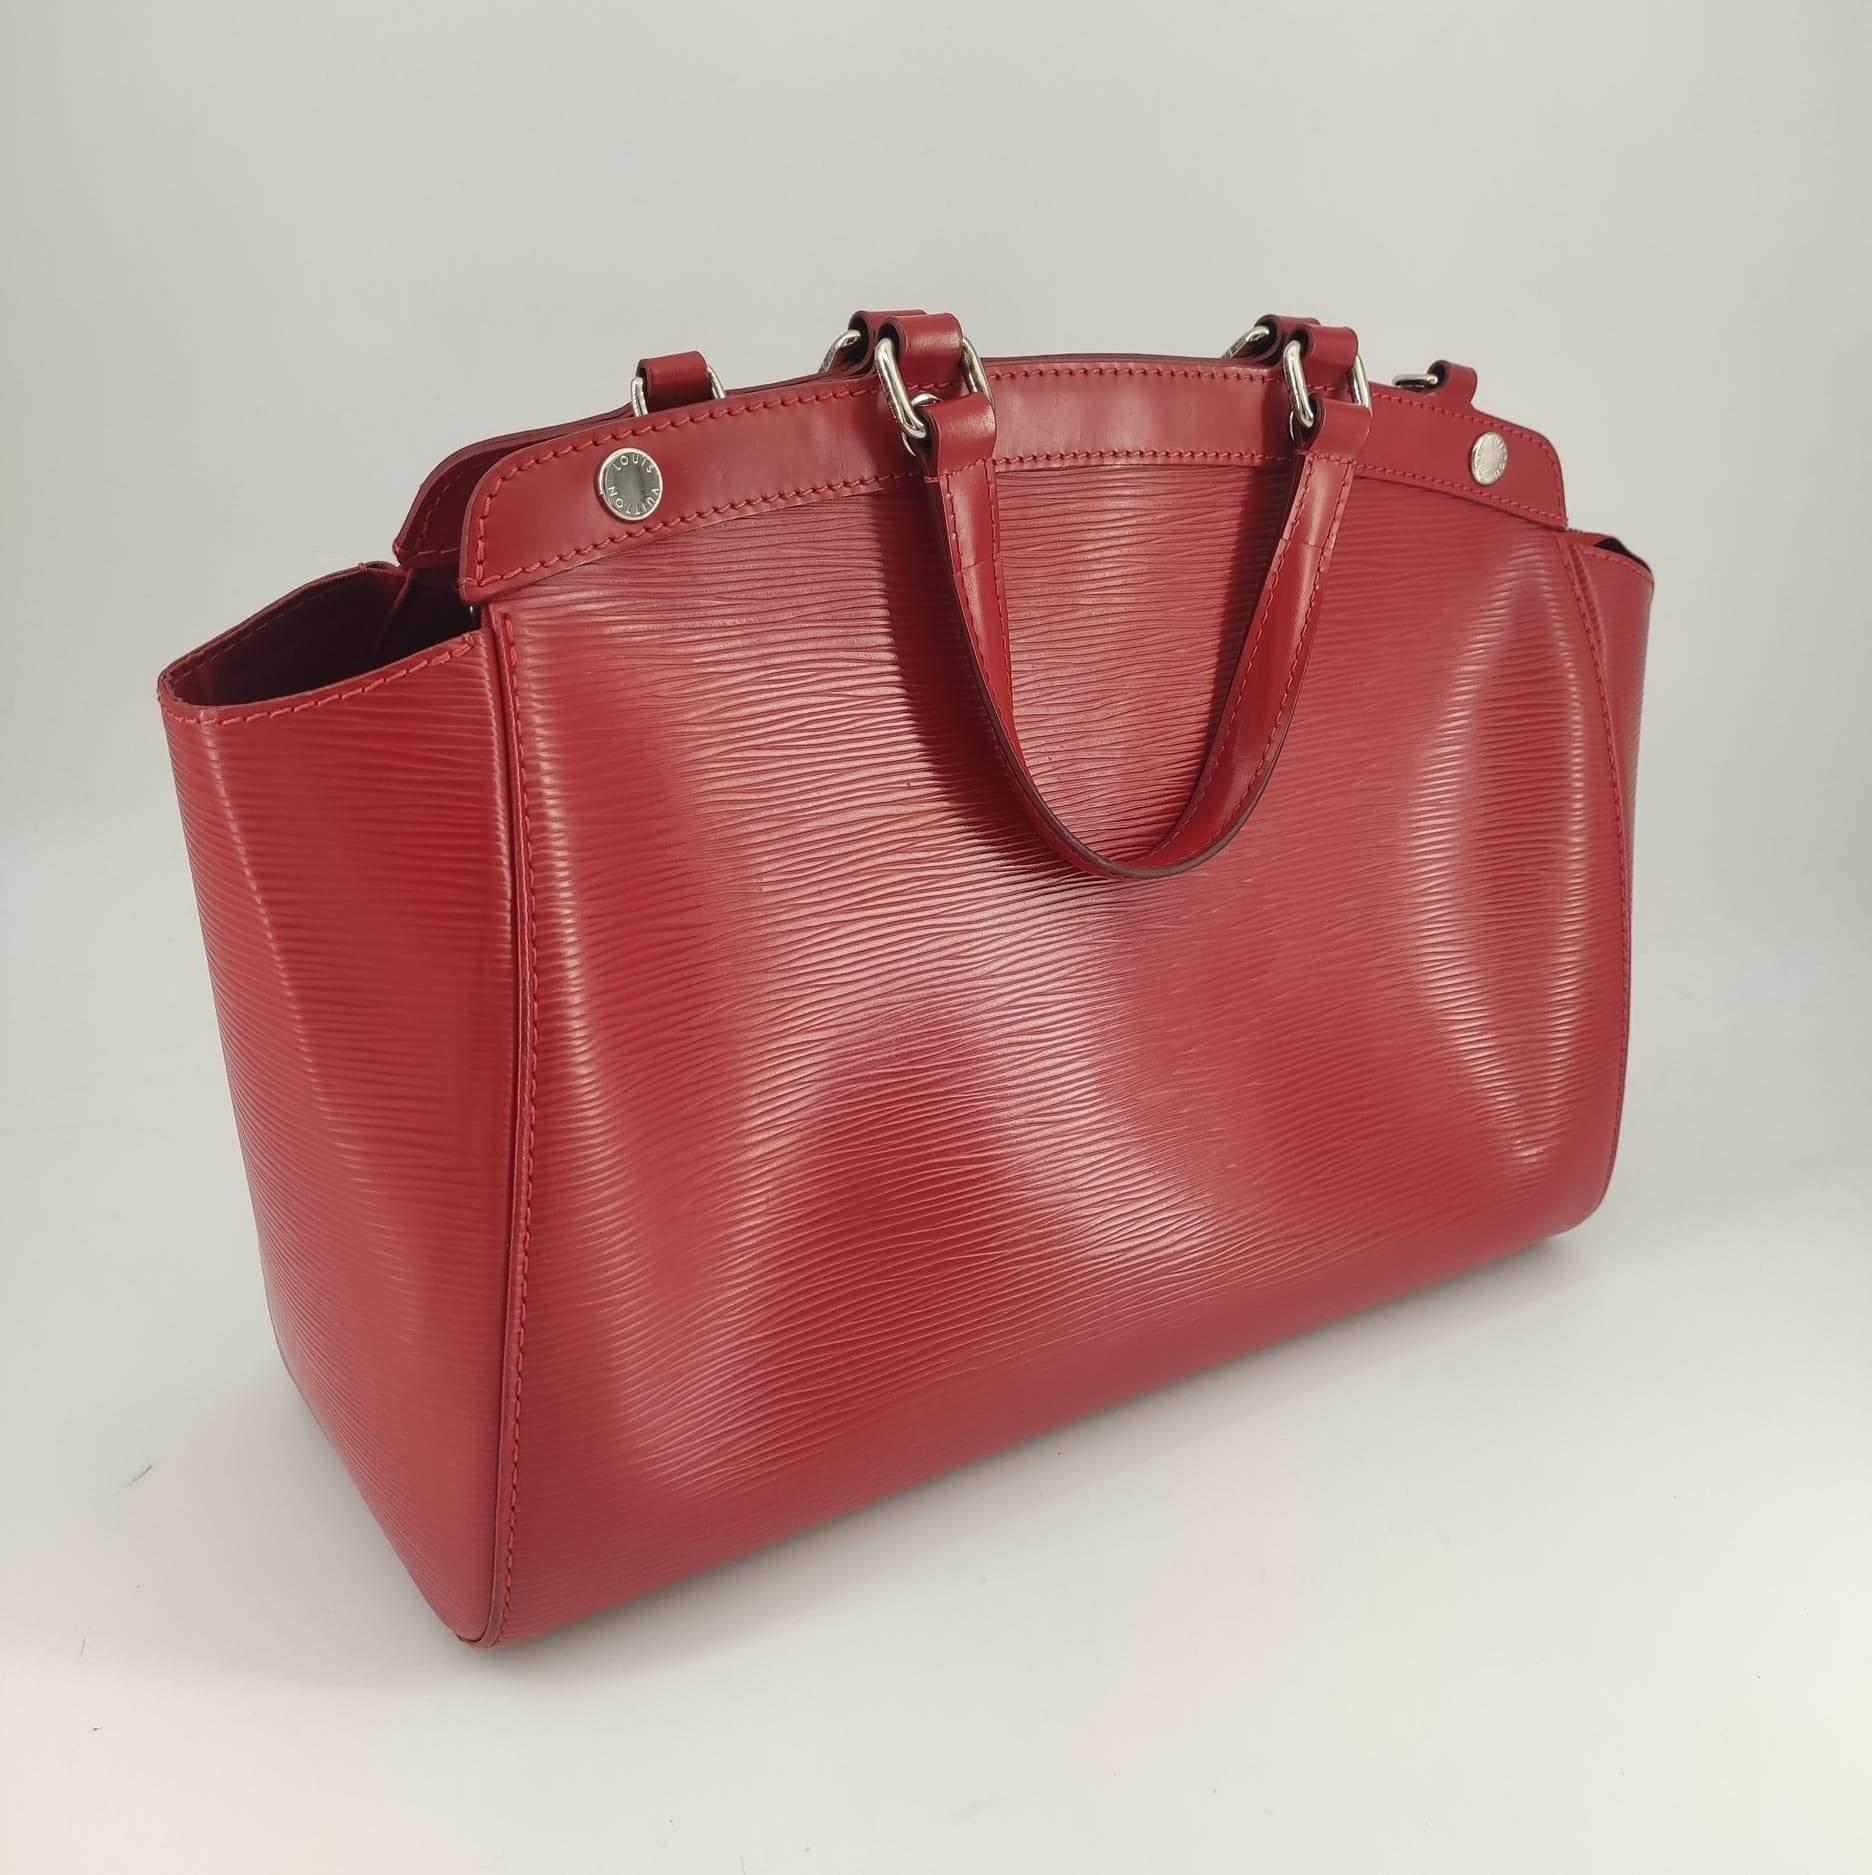 - Designer: LOUIS VUITTON
- Model: Bréa
- Condition: Good condition. Sign of wear on base corners, Scratches on hardware
- Accessories: None
- Measurements: Width: 25cm, Height: 20cm, Depth: 5cm, Strap: 95cm
- Exterior Material: Leather
- Exterior